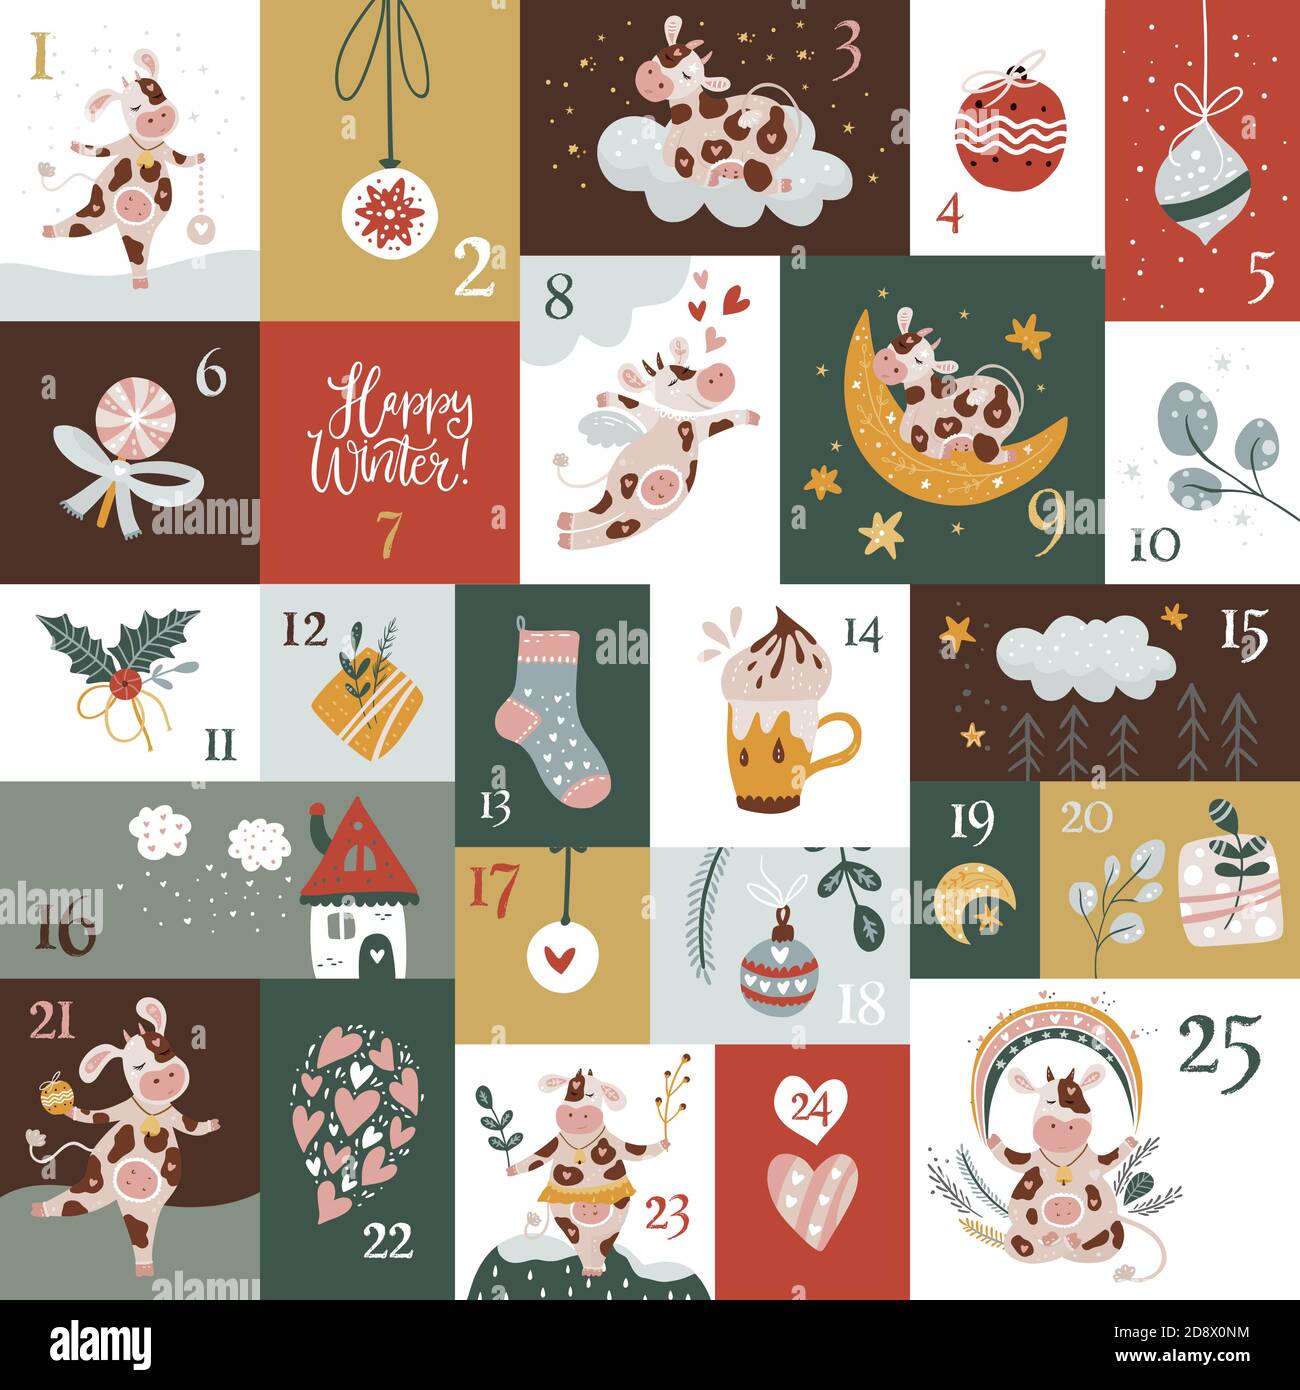 Cute cartoon advent calendar with funny cow animals, and signs for 25